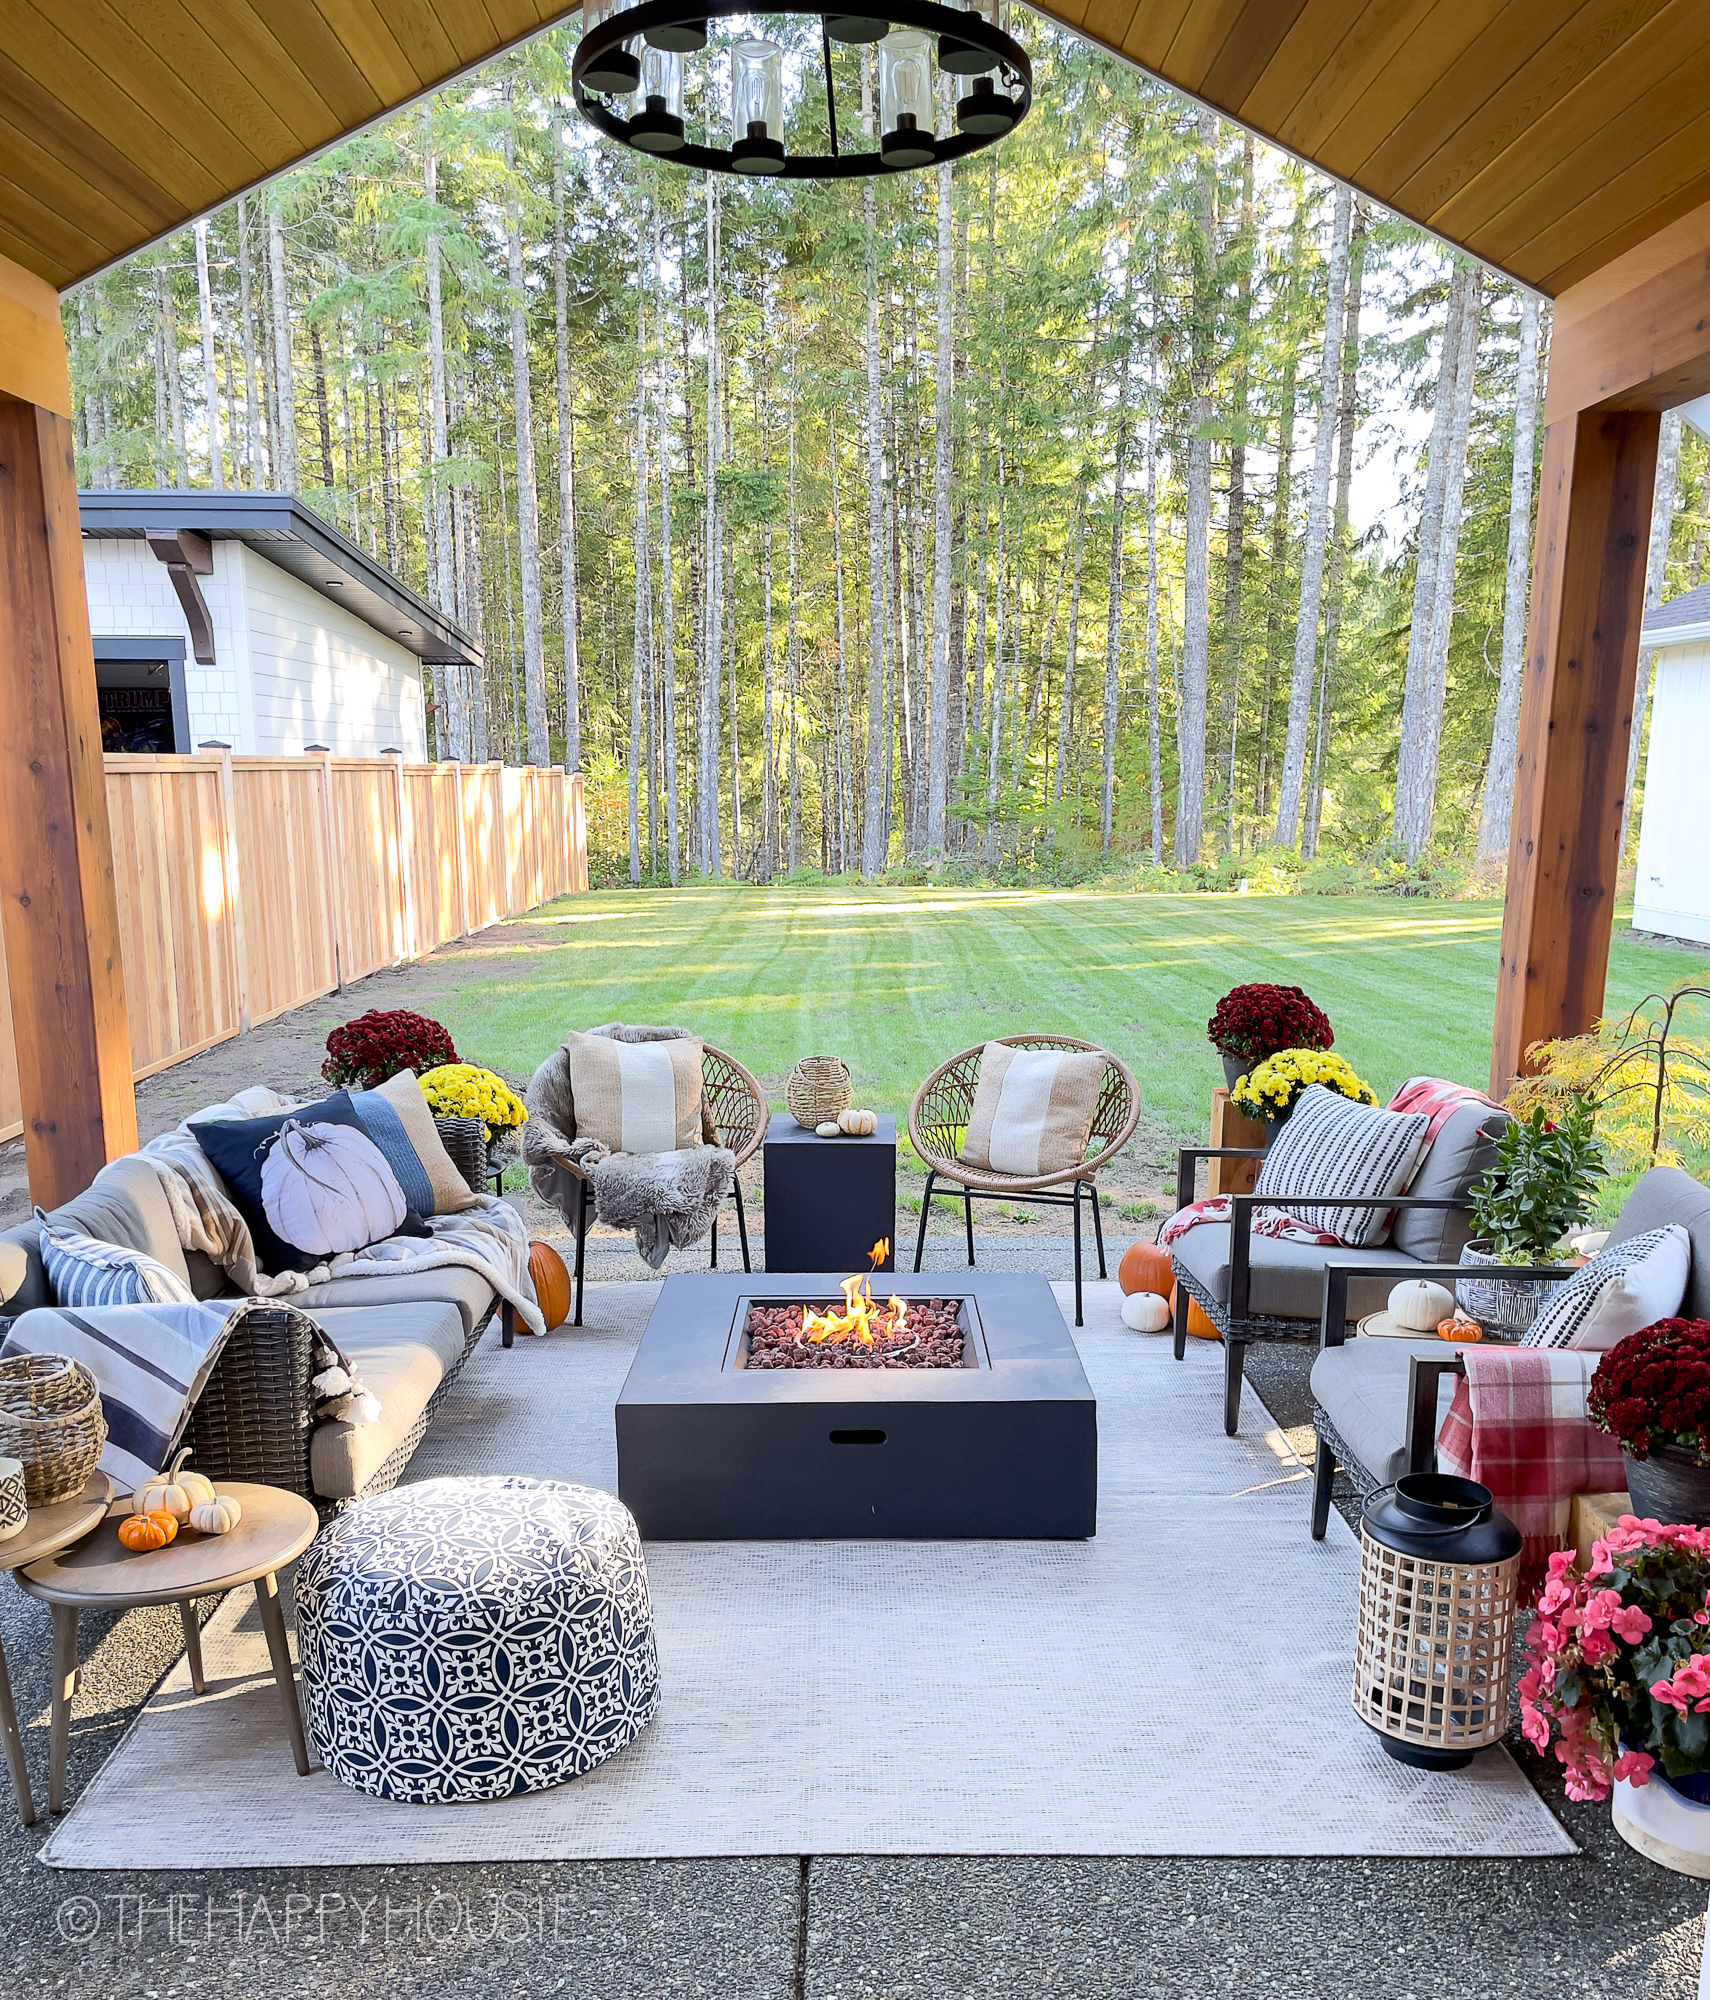 An outdoor porch area with a small firepit.